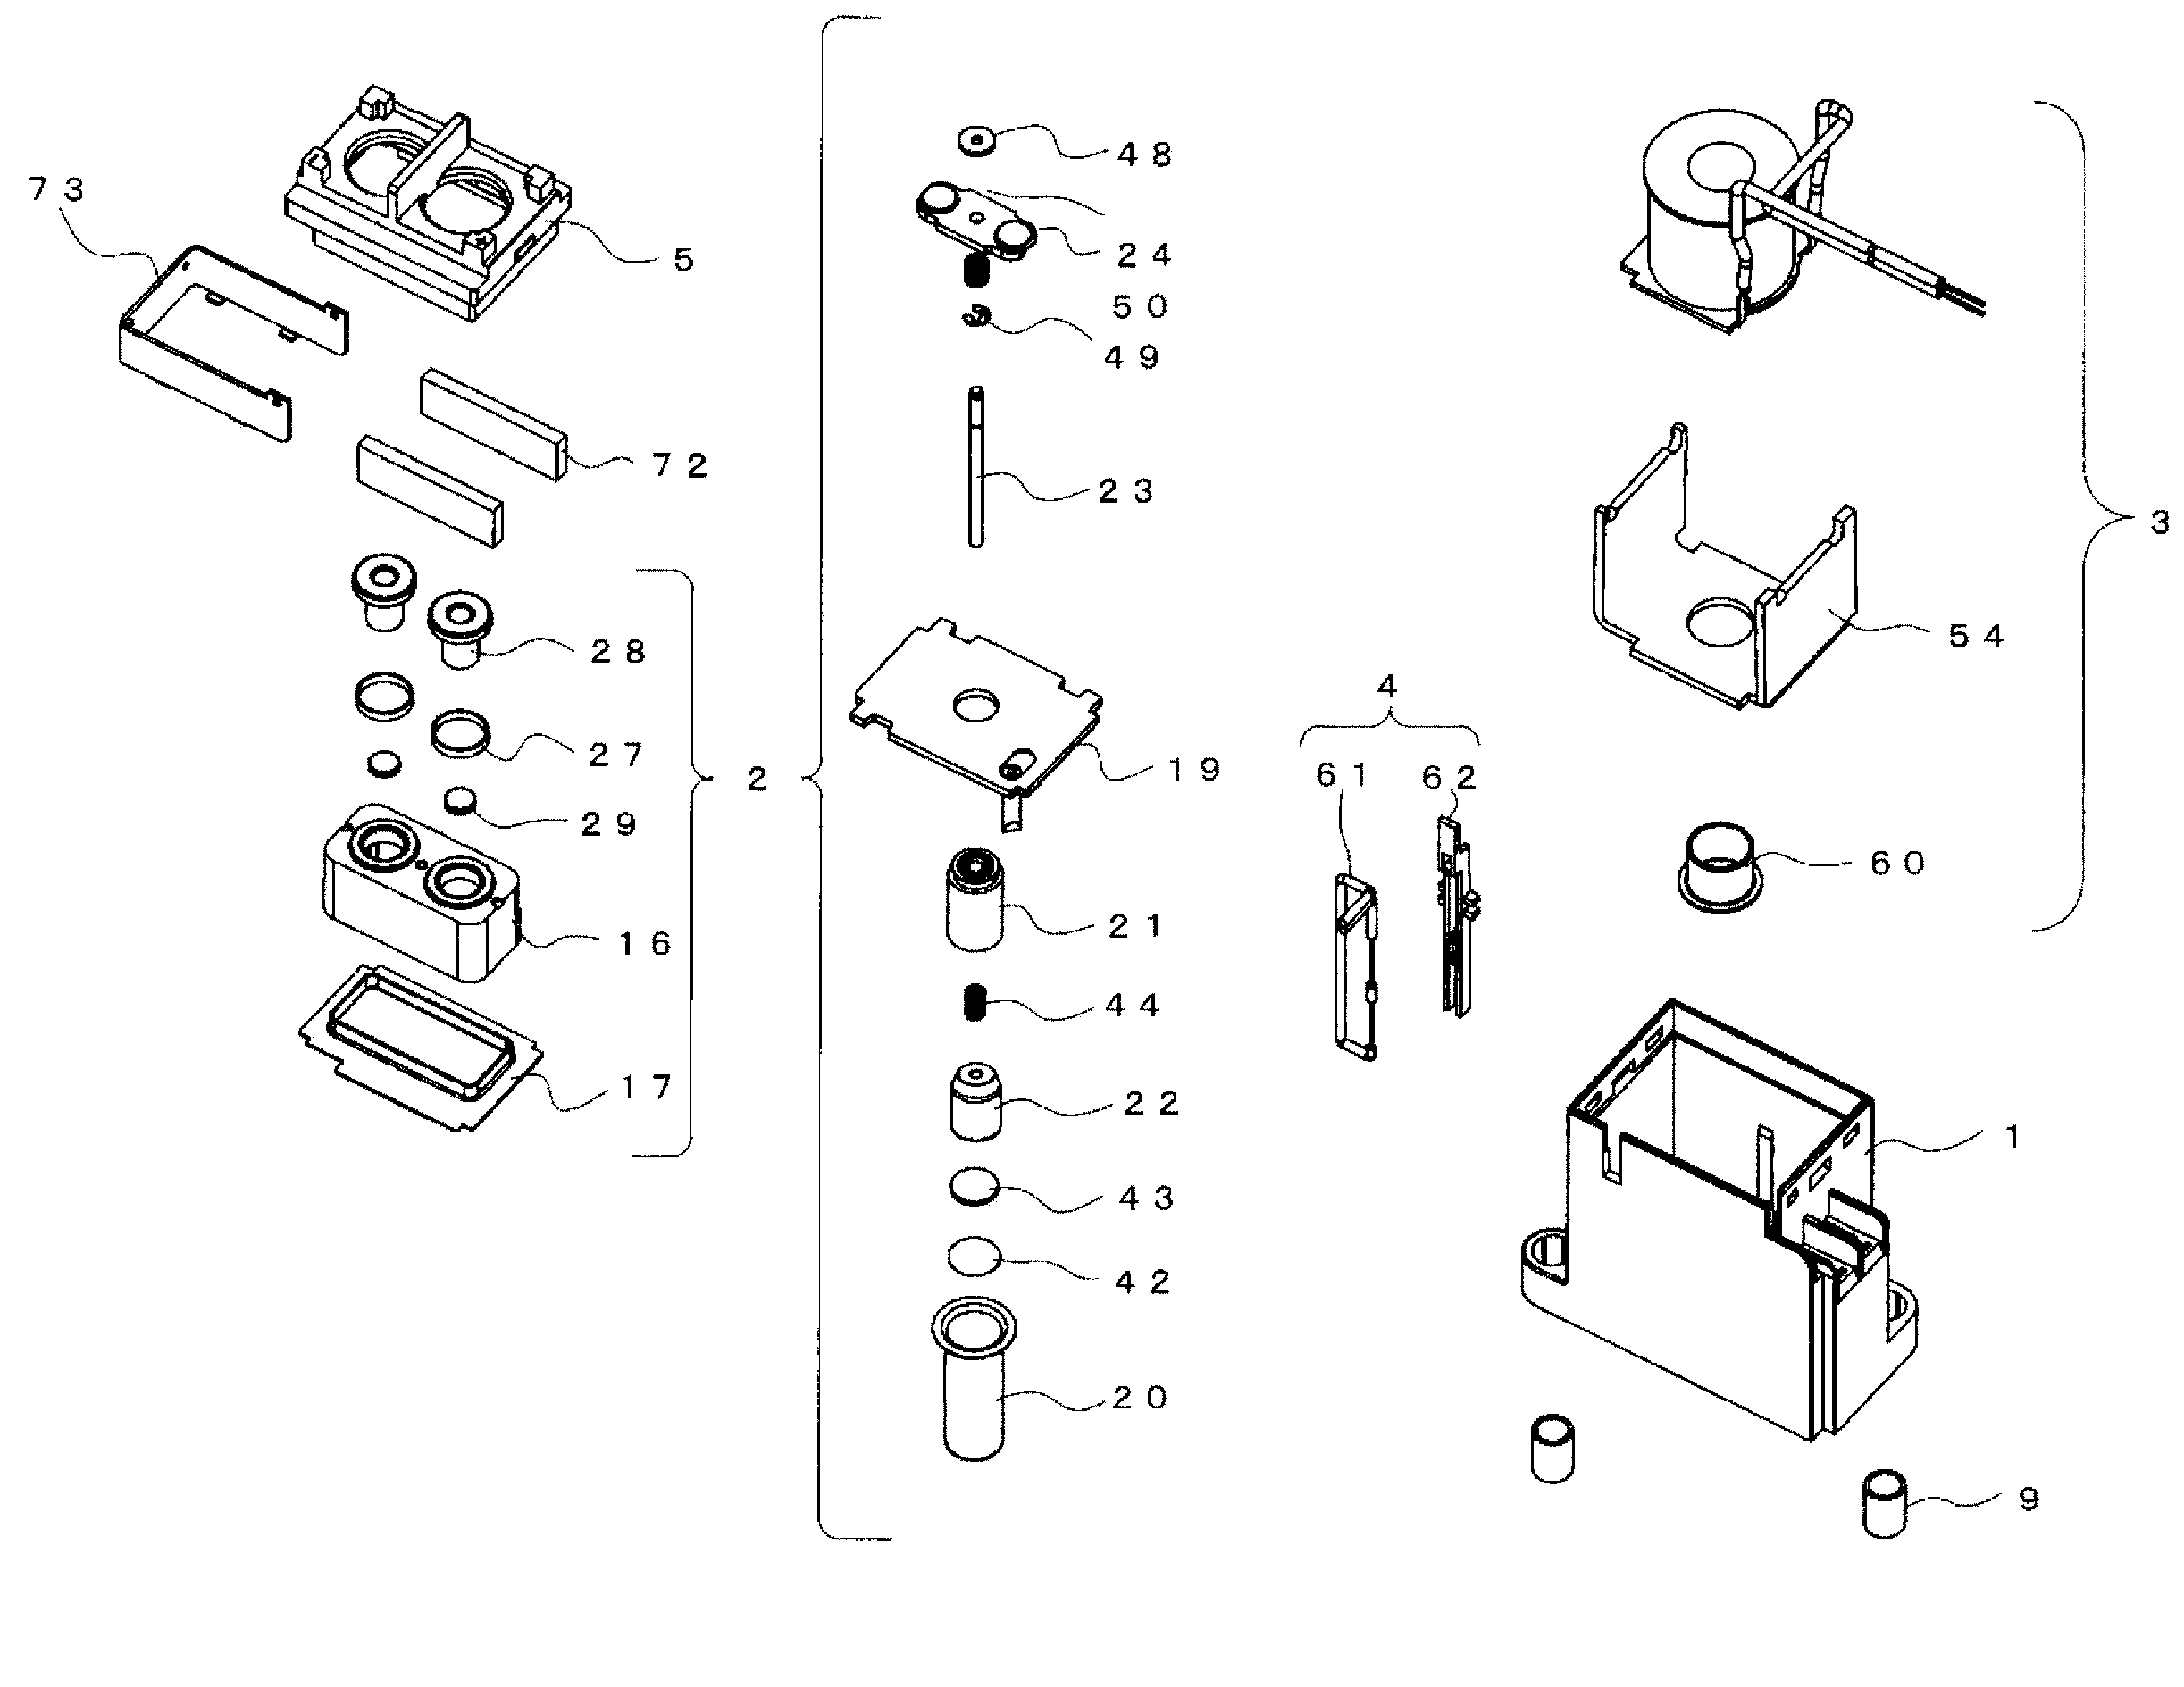 Electromagnetic relay and reed switch attachment structure